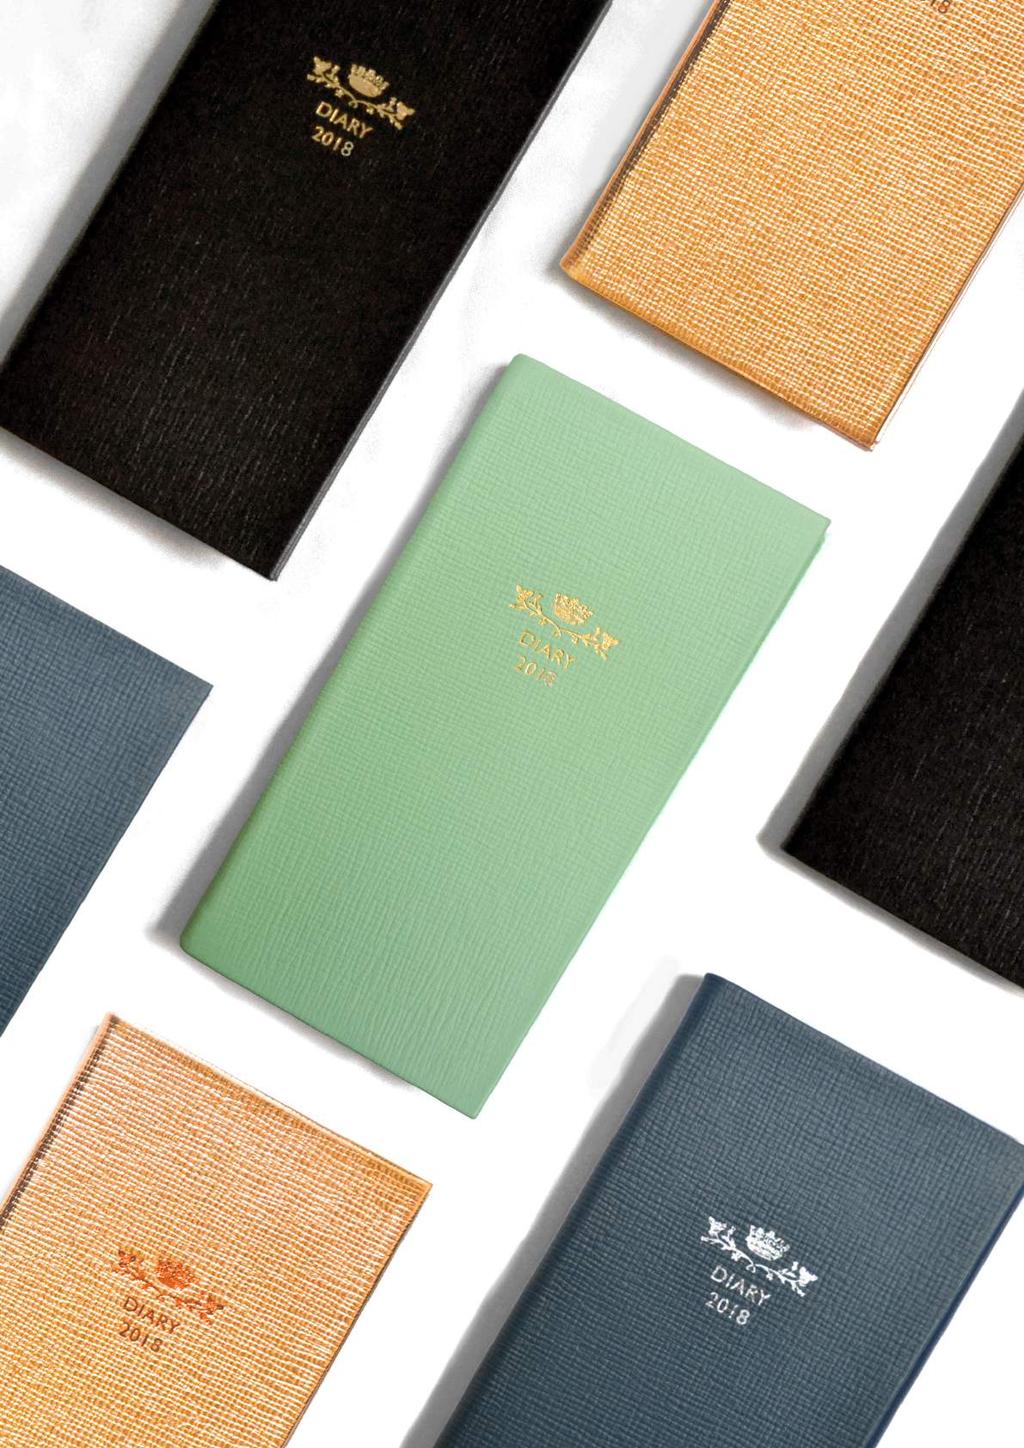 INTRODUCTION WELCOME TO DEBRETT S CORPORATE GIFT GUIDE The British authority on etiquette, achievement and style since 1769, Debrett s knows that in business, the personal touch can make all the